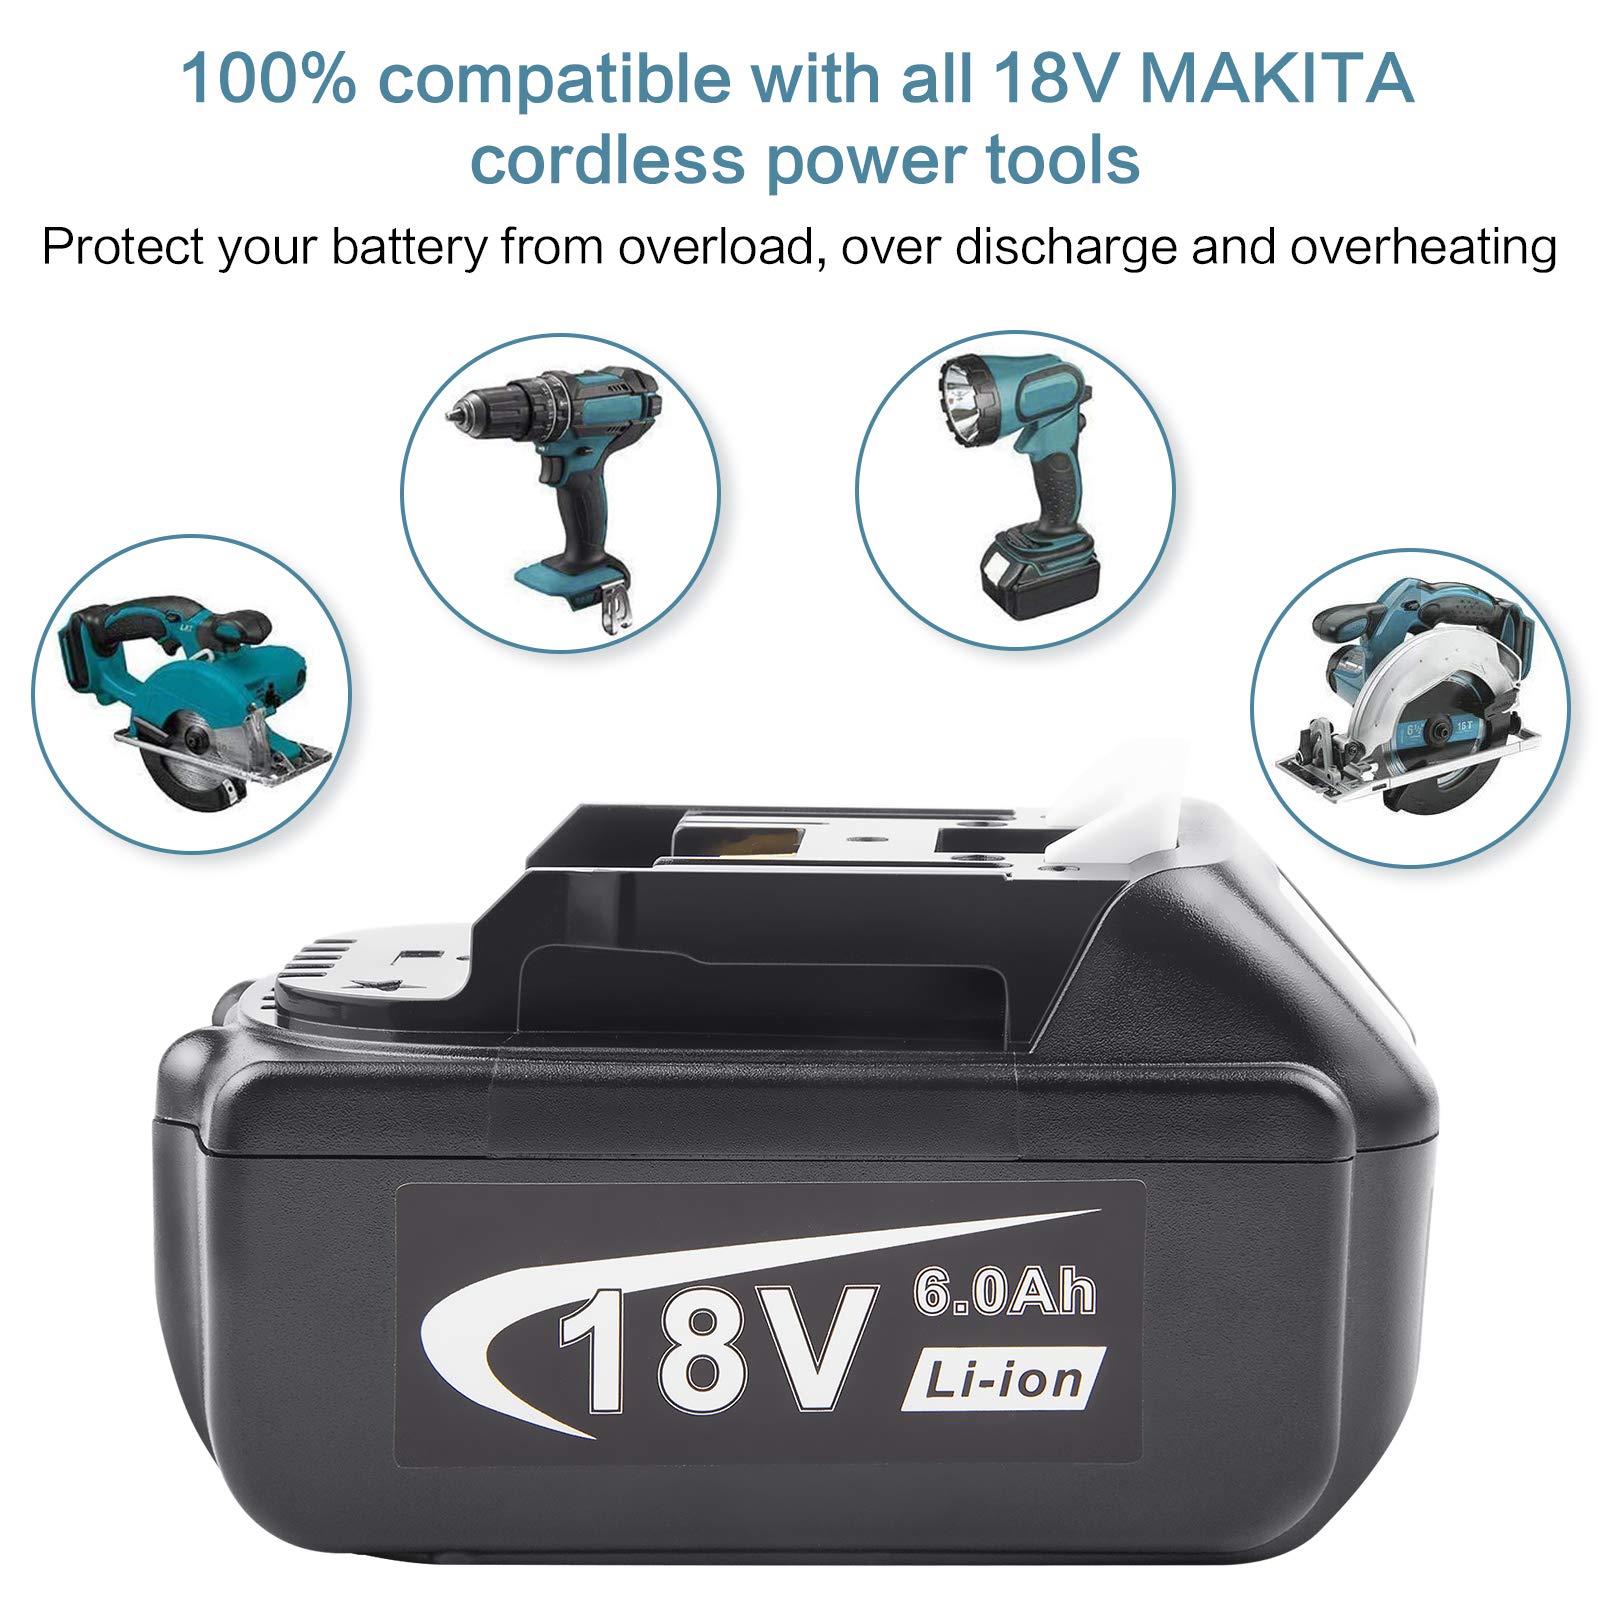 LabTEC BL1860 18V 6000mAh Lithium Battery Replacement for Makita 18V BL1860B BL1850 BL1840 BL1850B-2 BL1845 BL1830 BL1820 BL1815 LXT-400 Cordless Power Tools Batteries with LED Indicator (1 Pack)